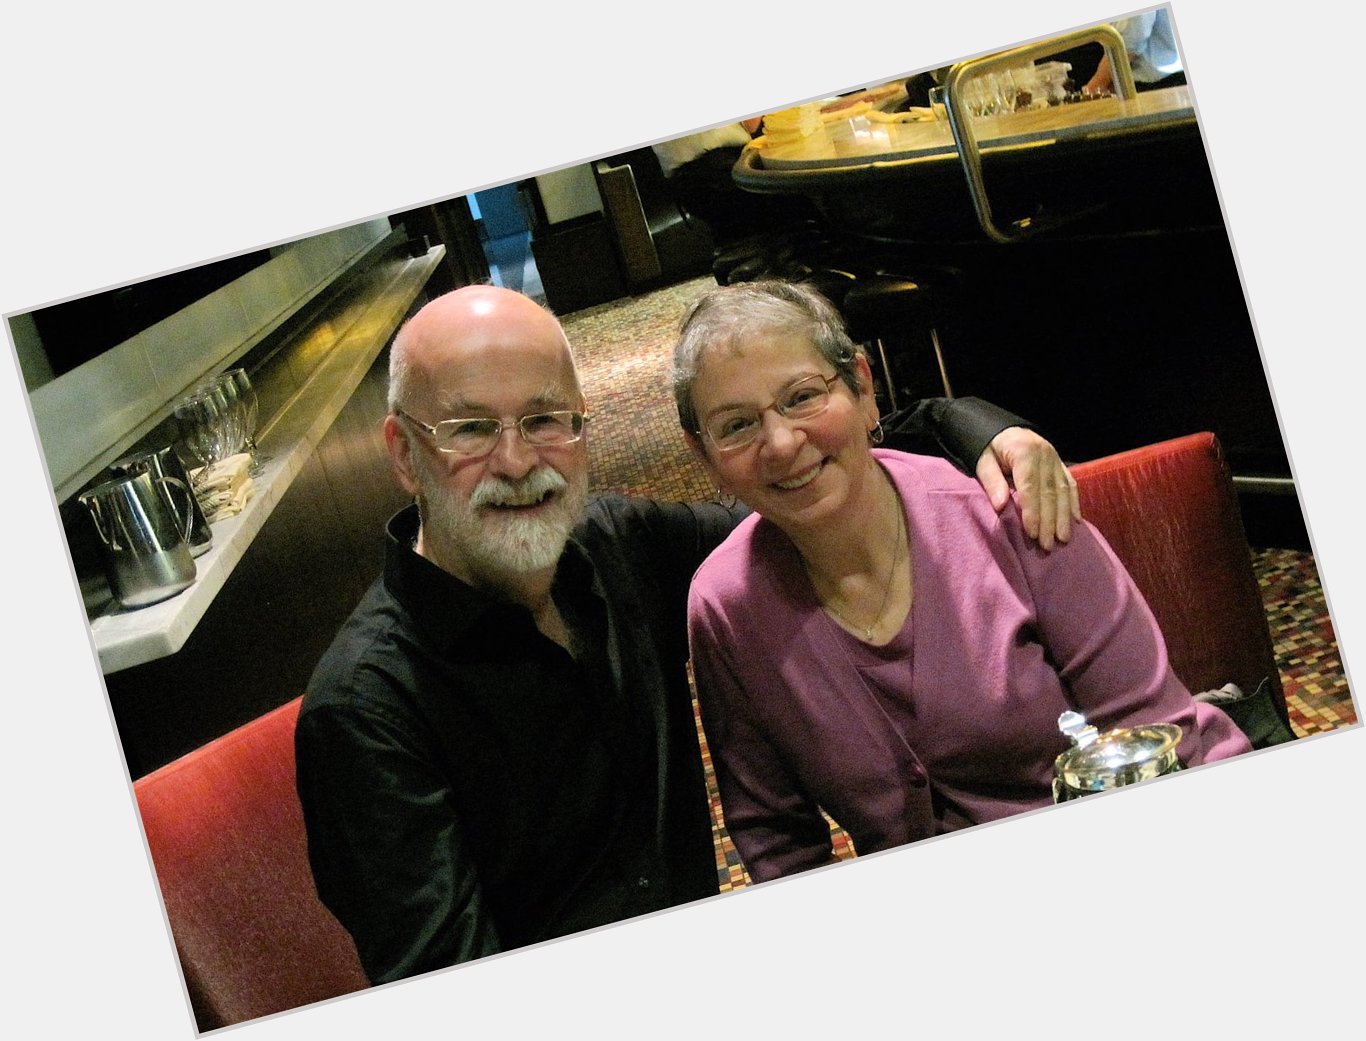 Happy birthday to Terry Pratchett - we had breakfast together in Seattle on his very last visit, 8 years ago 